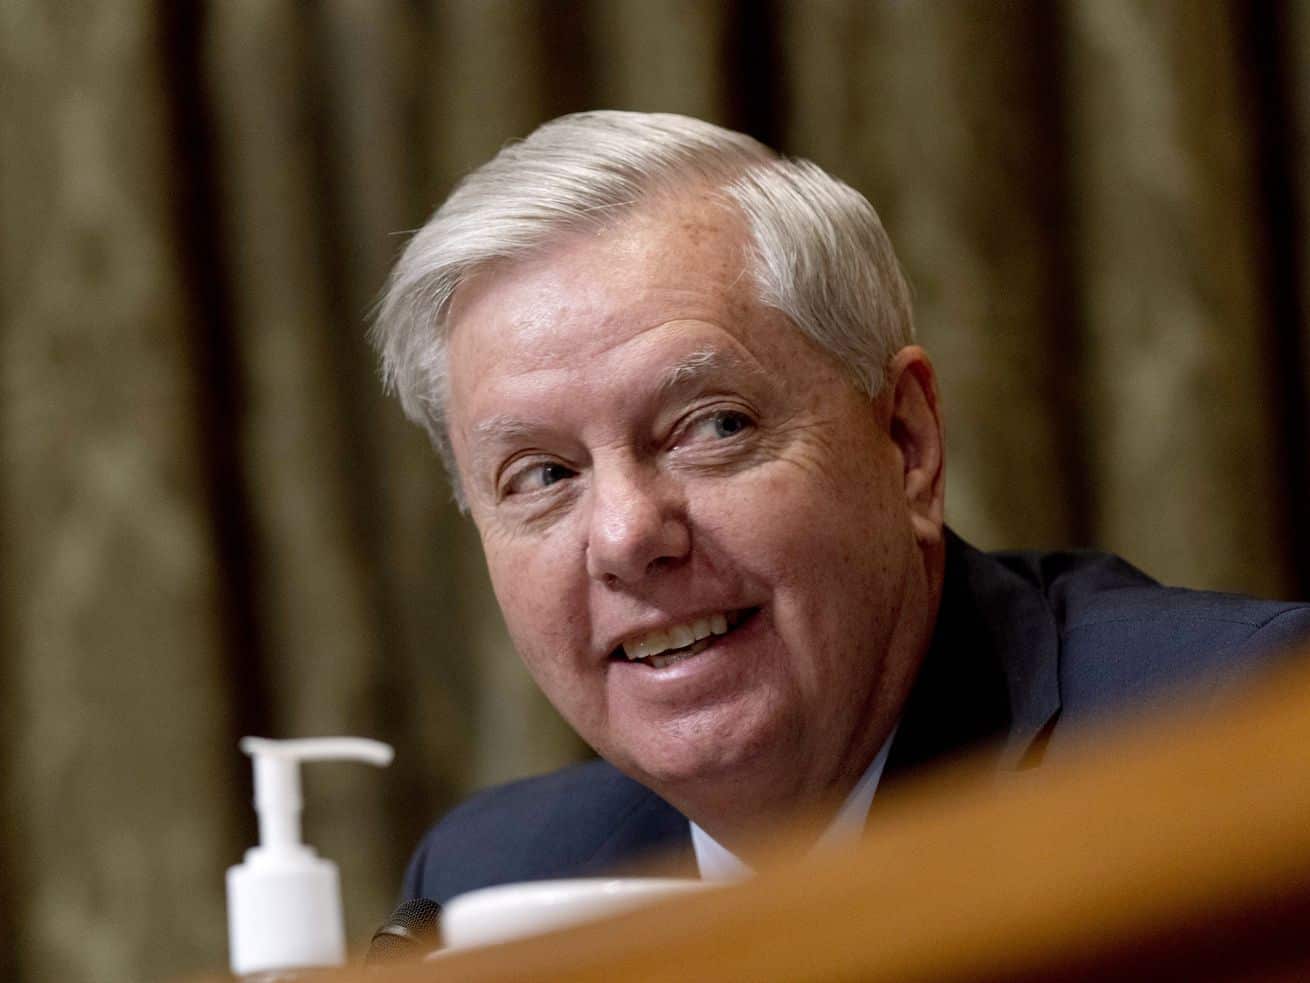 A Trump criminal probe in Georgia expands to include Sen. Lindsey Graham